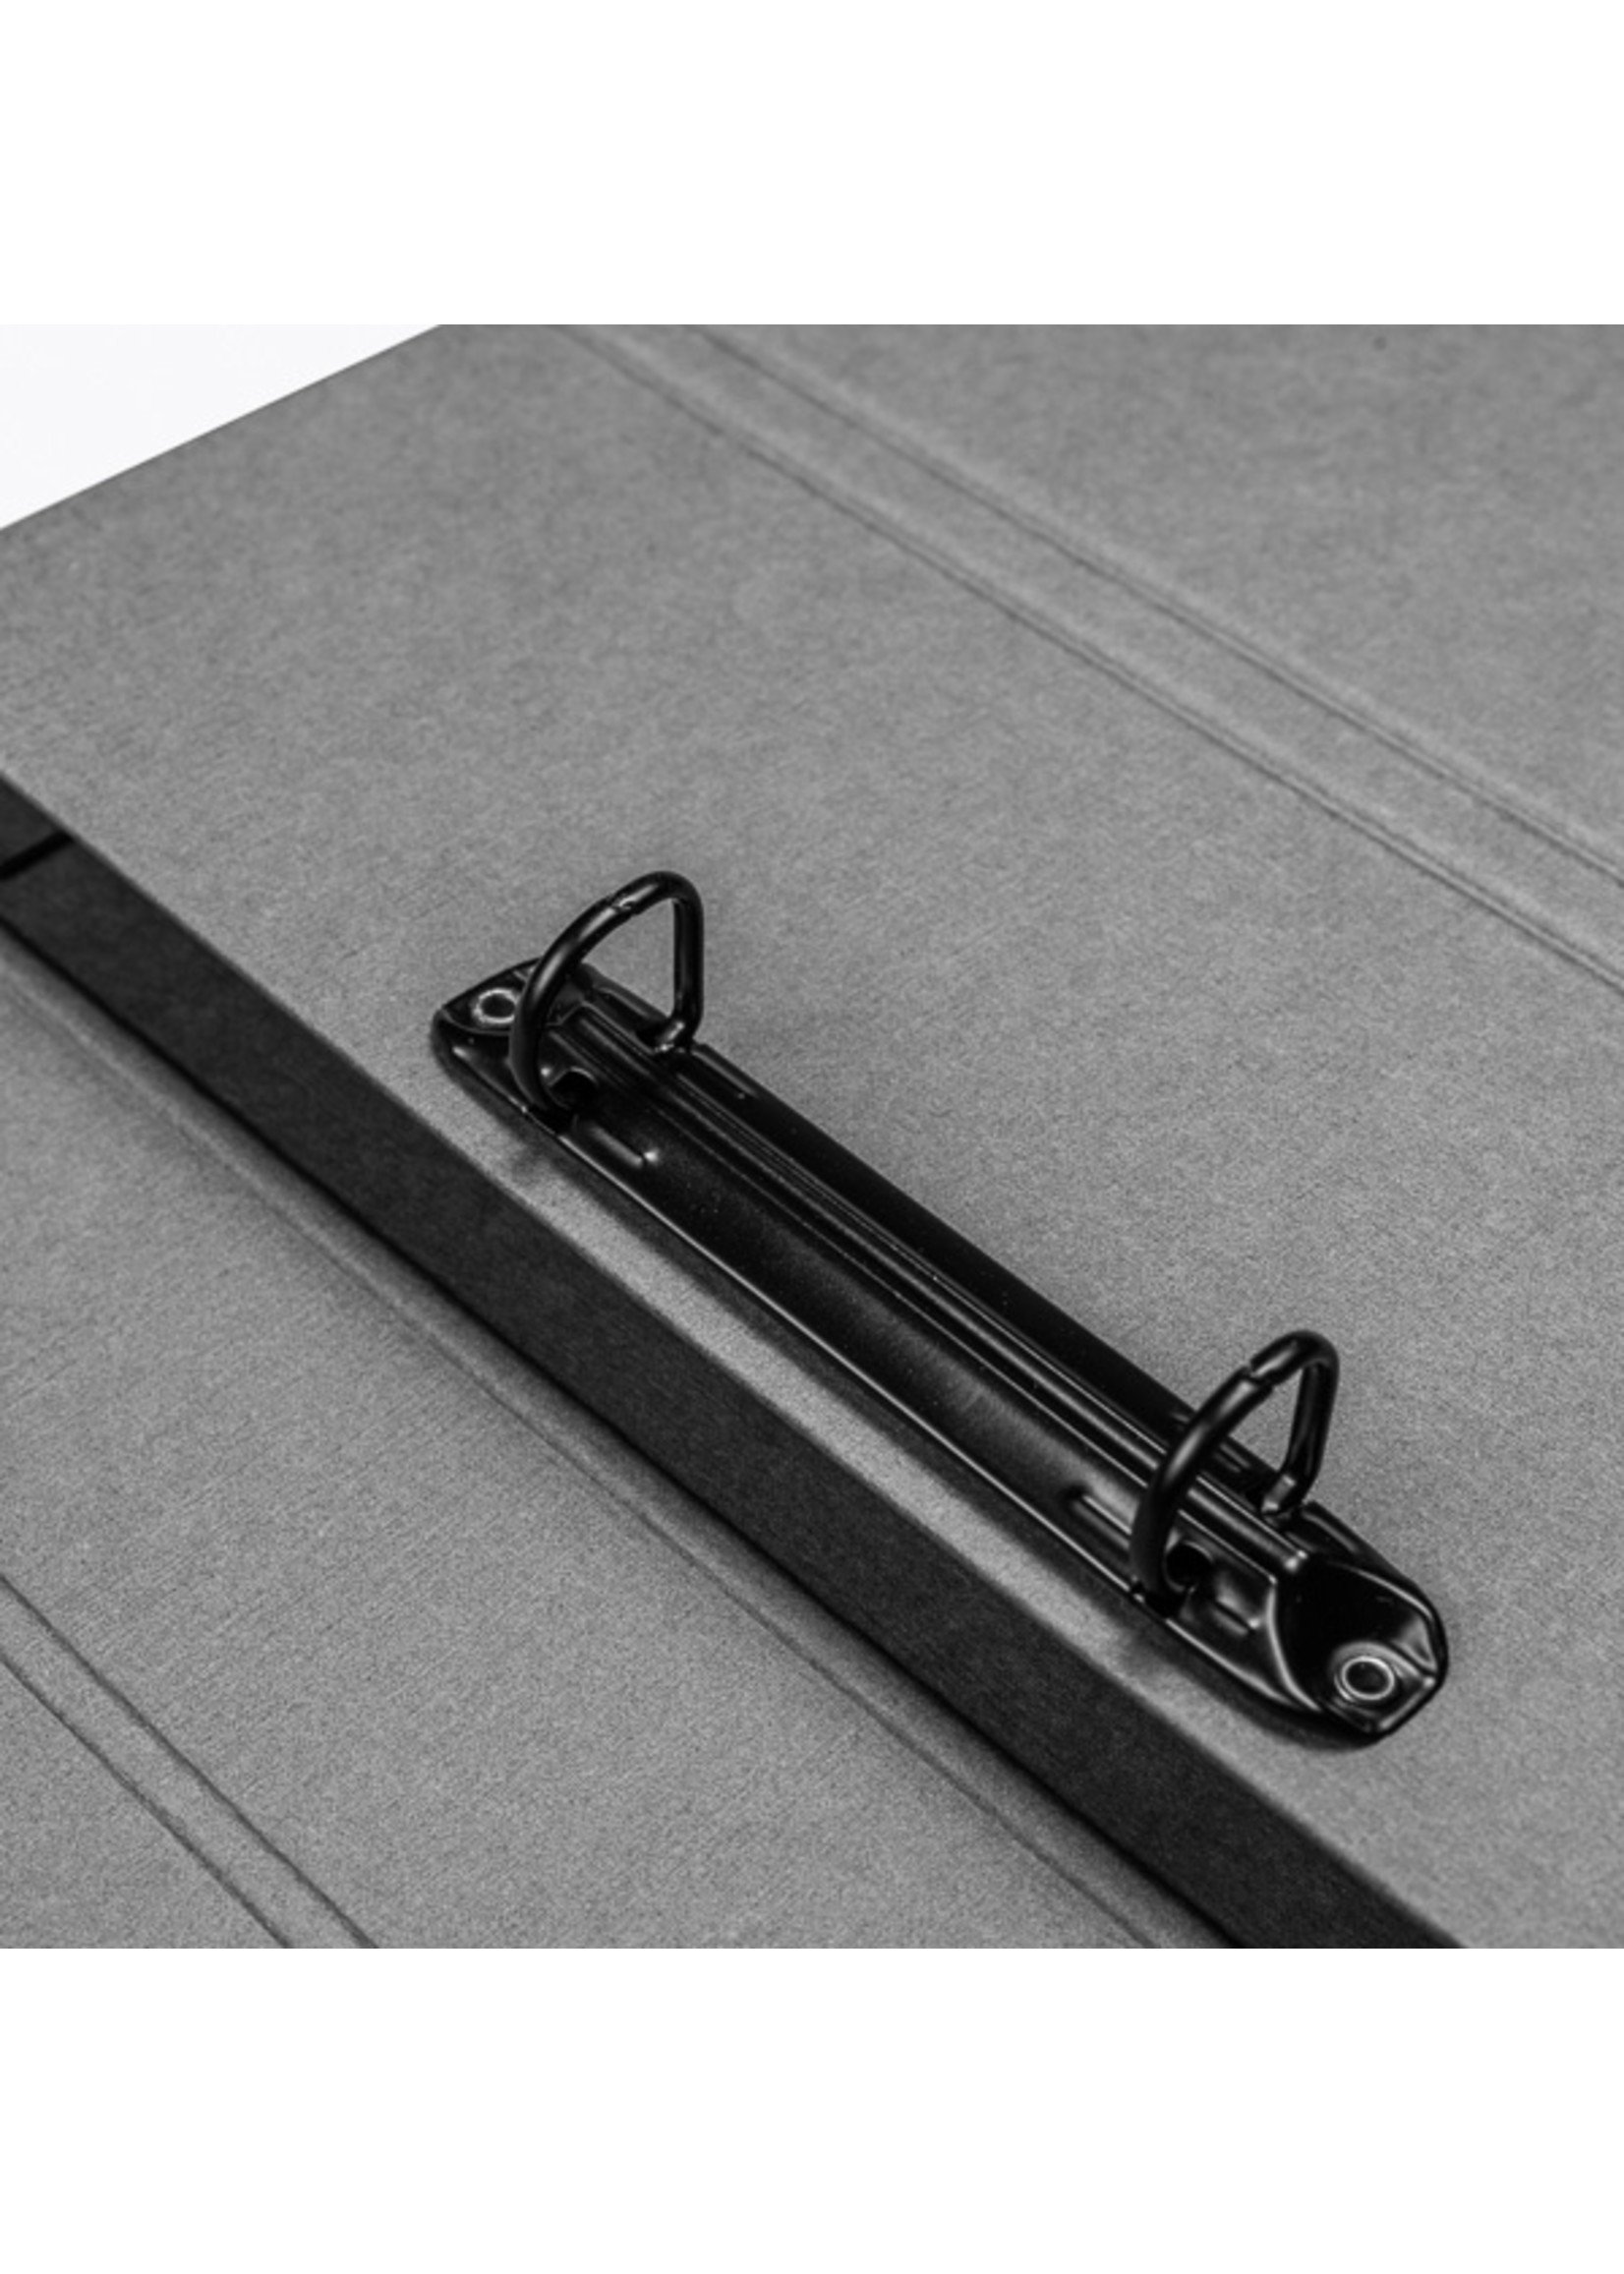 Deluxe ring binder charcoal